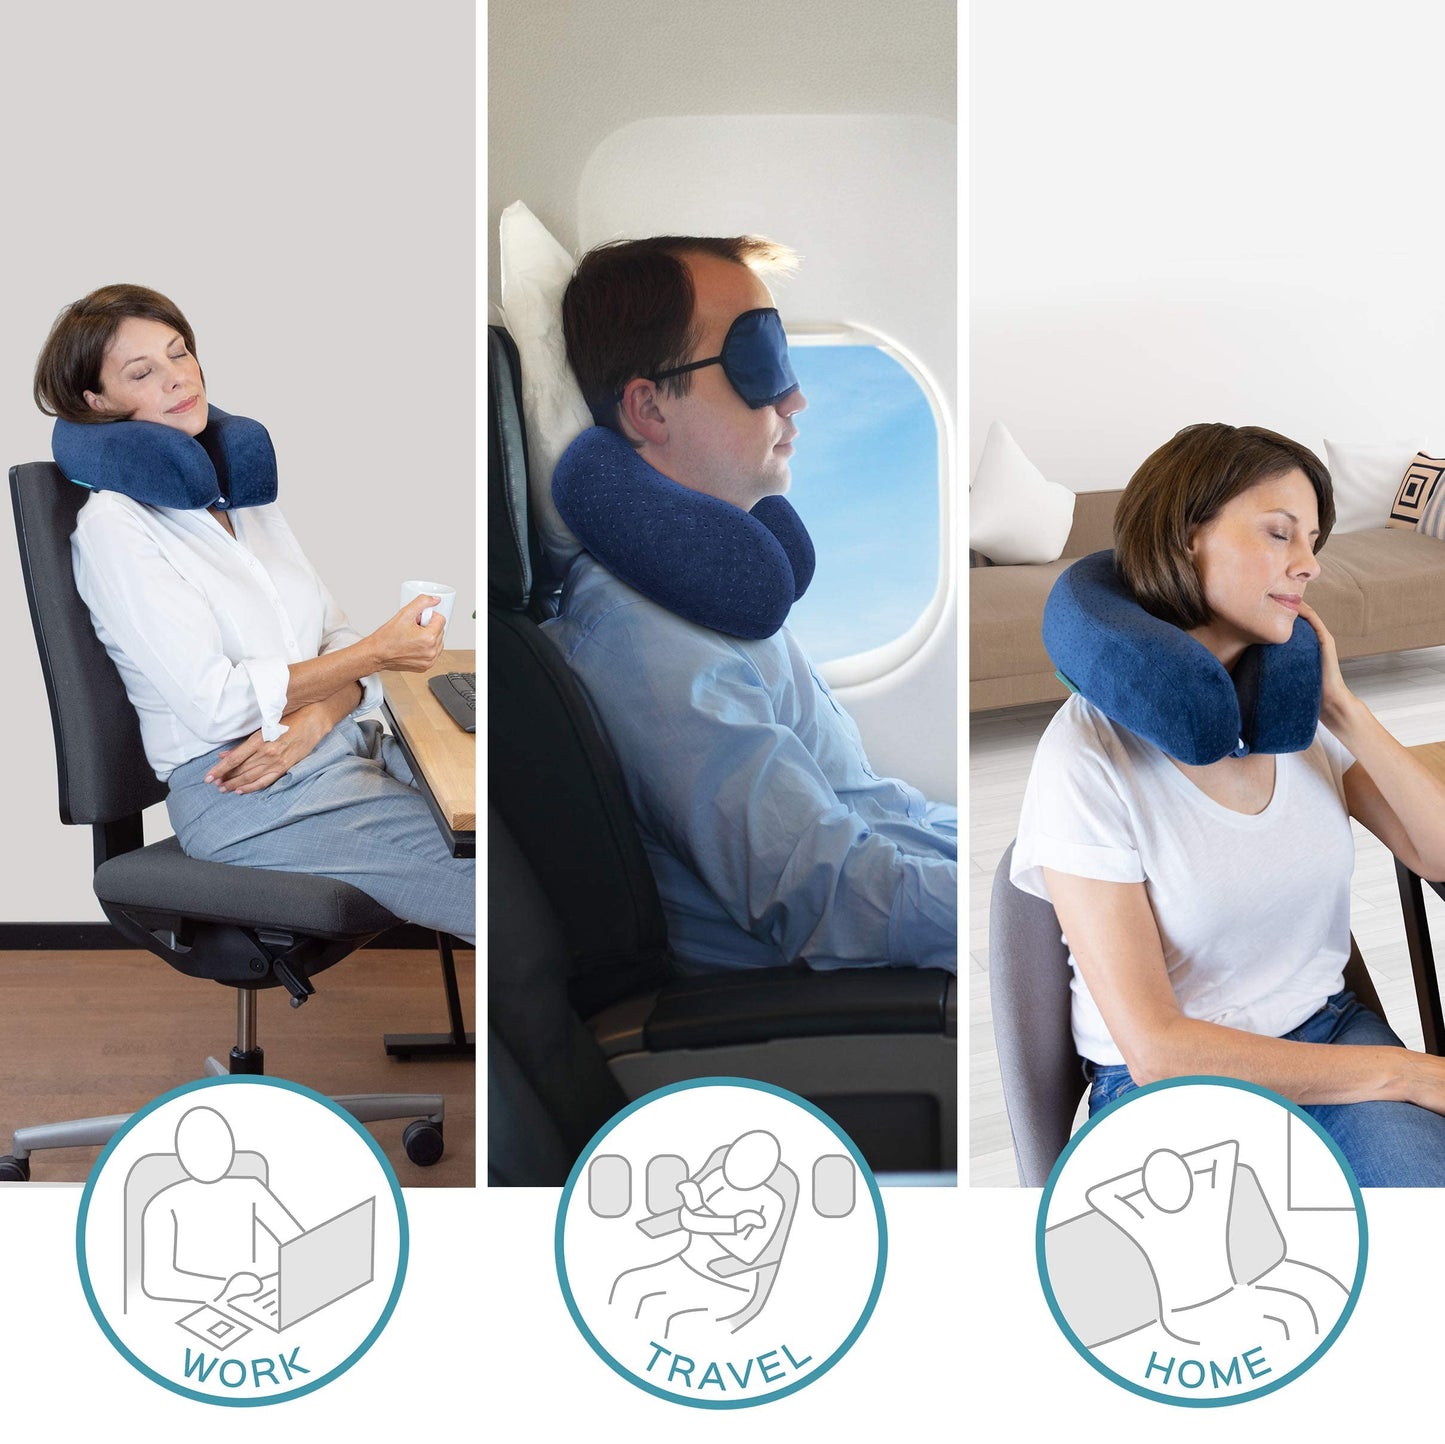 bonmedico Flat Ergonomic Neck Pillow Made from Memory Foam, Flight Pillow, Great as a Cervical Pillow for Home and Office, Travel Pillow for Women and Men, Blue